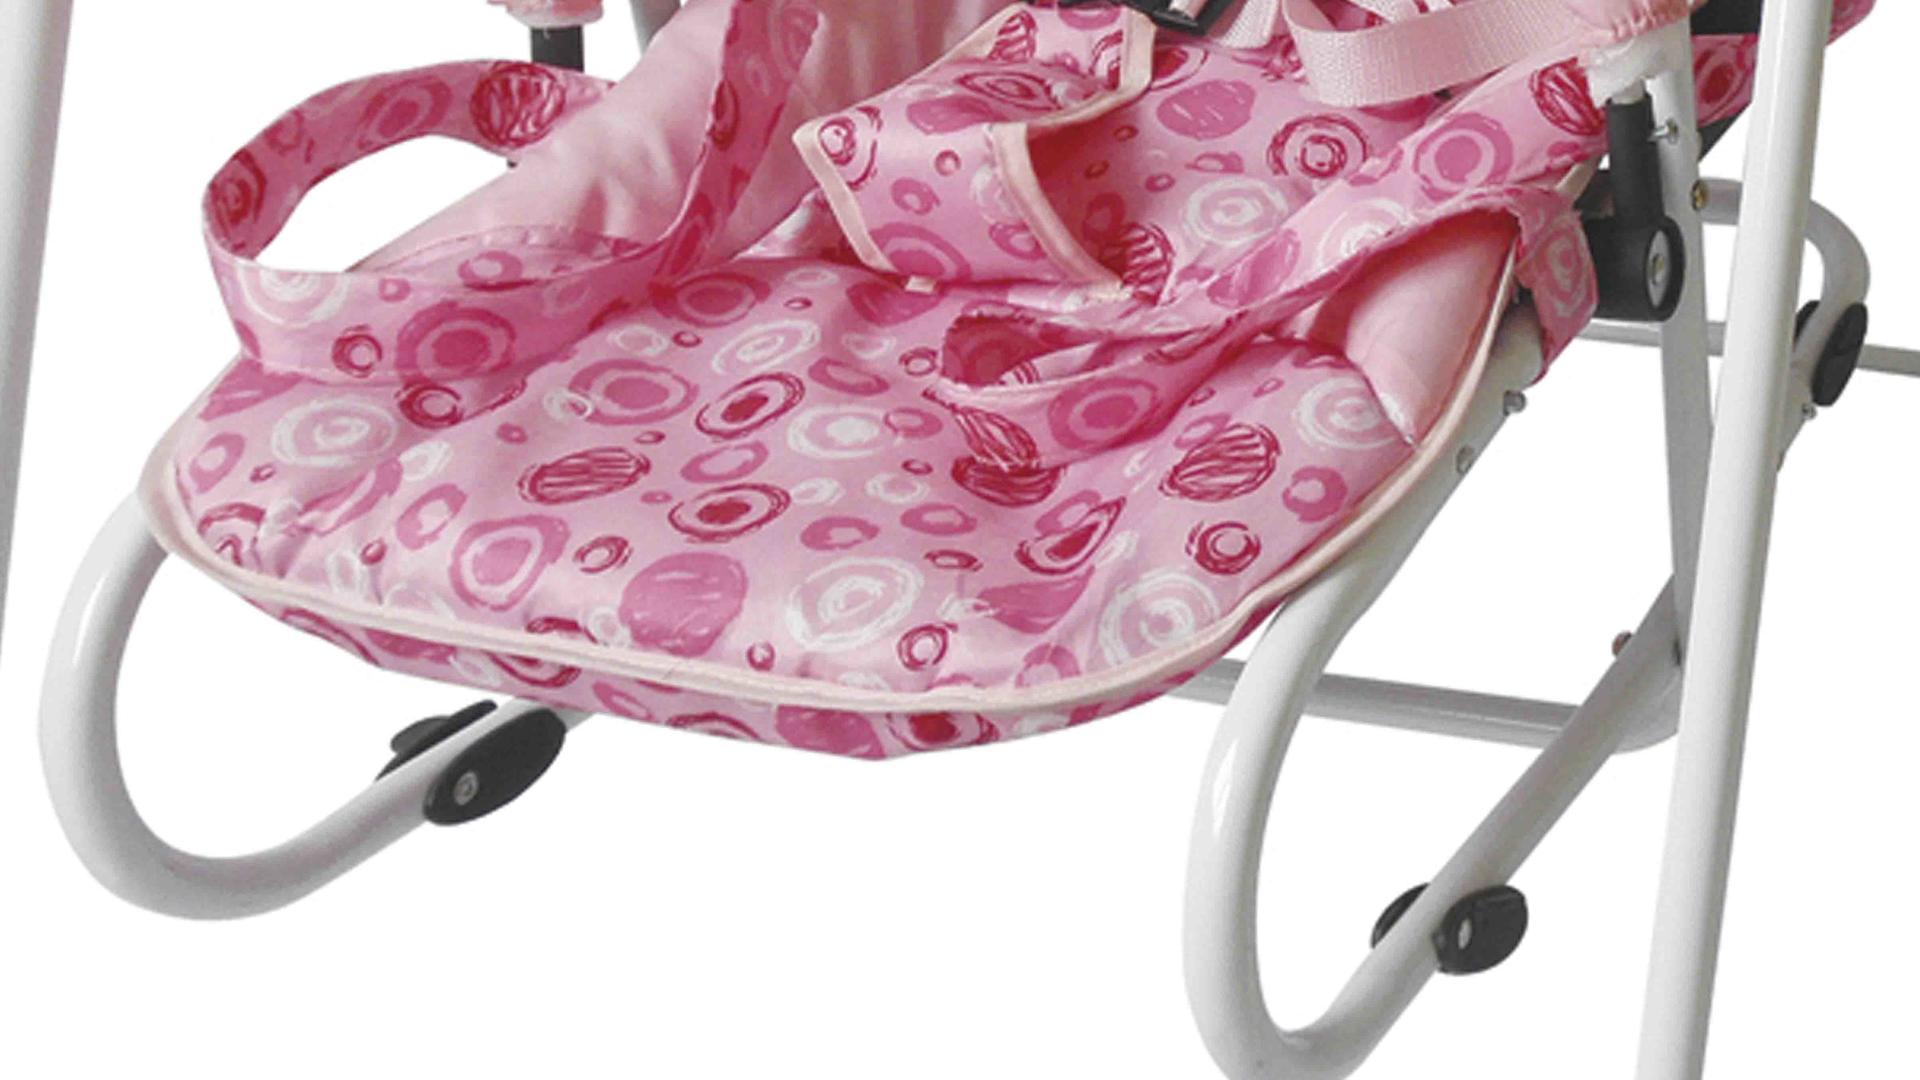 Aoqi babies swing with good price for household